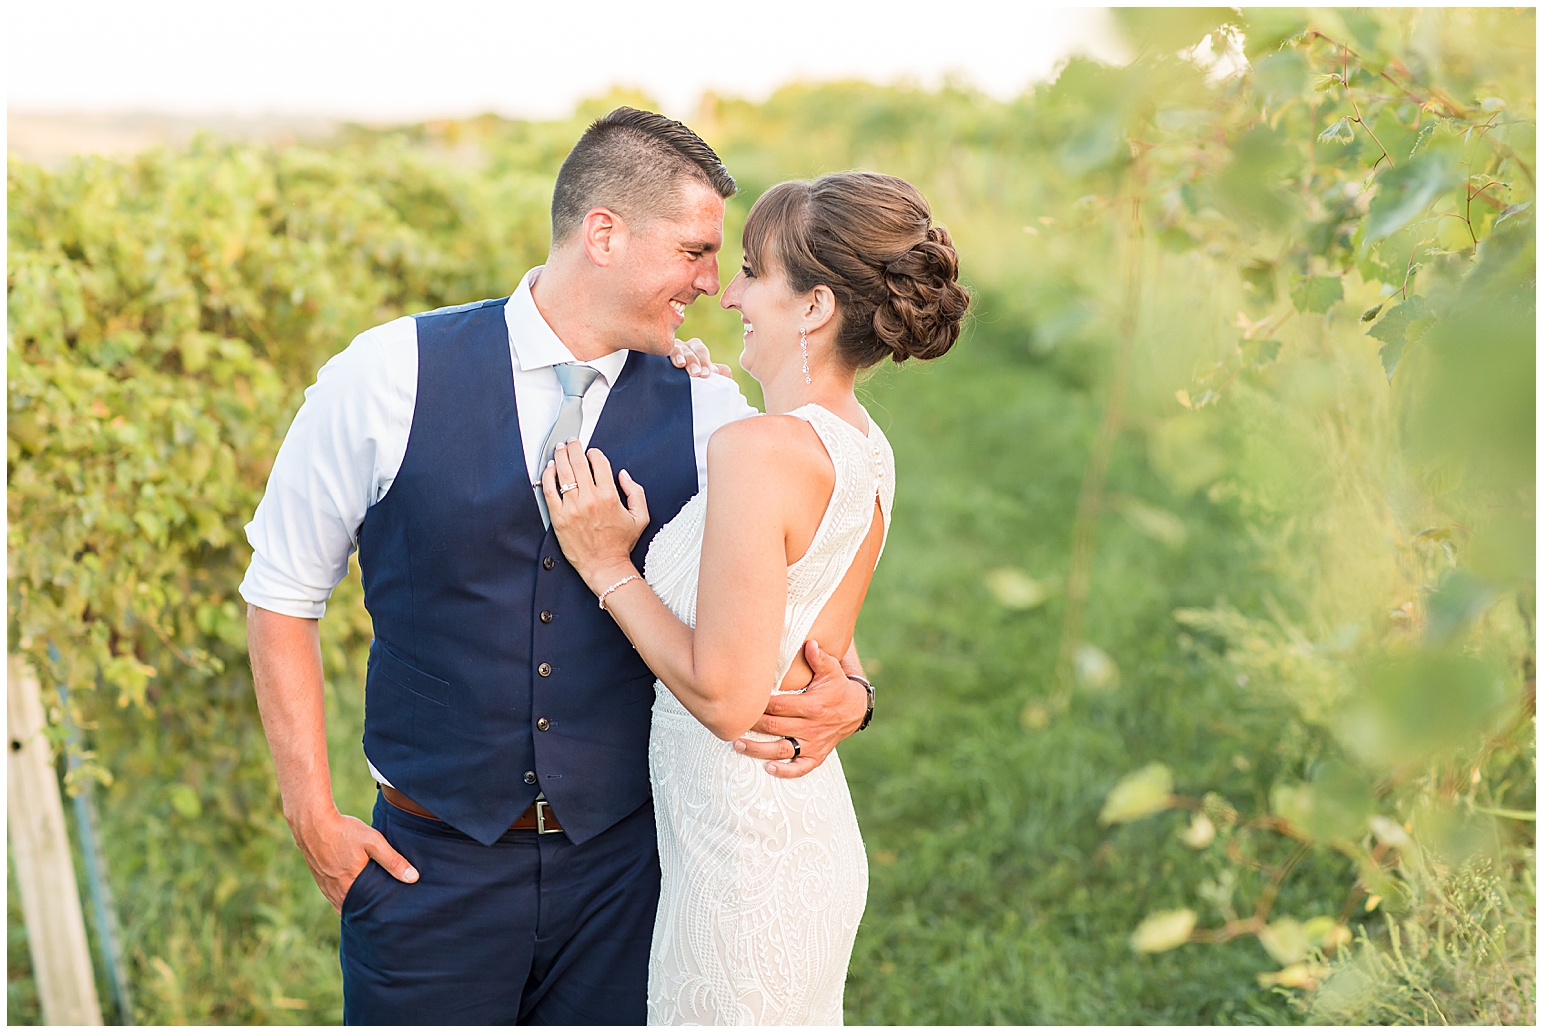 Bridal Party Portraits | Tucker Hill Wedding in Hinton, Iowa shot by Jessica Brees Photo & Video